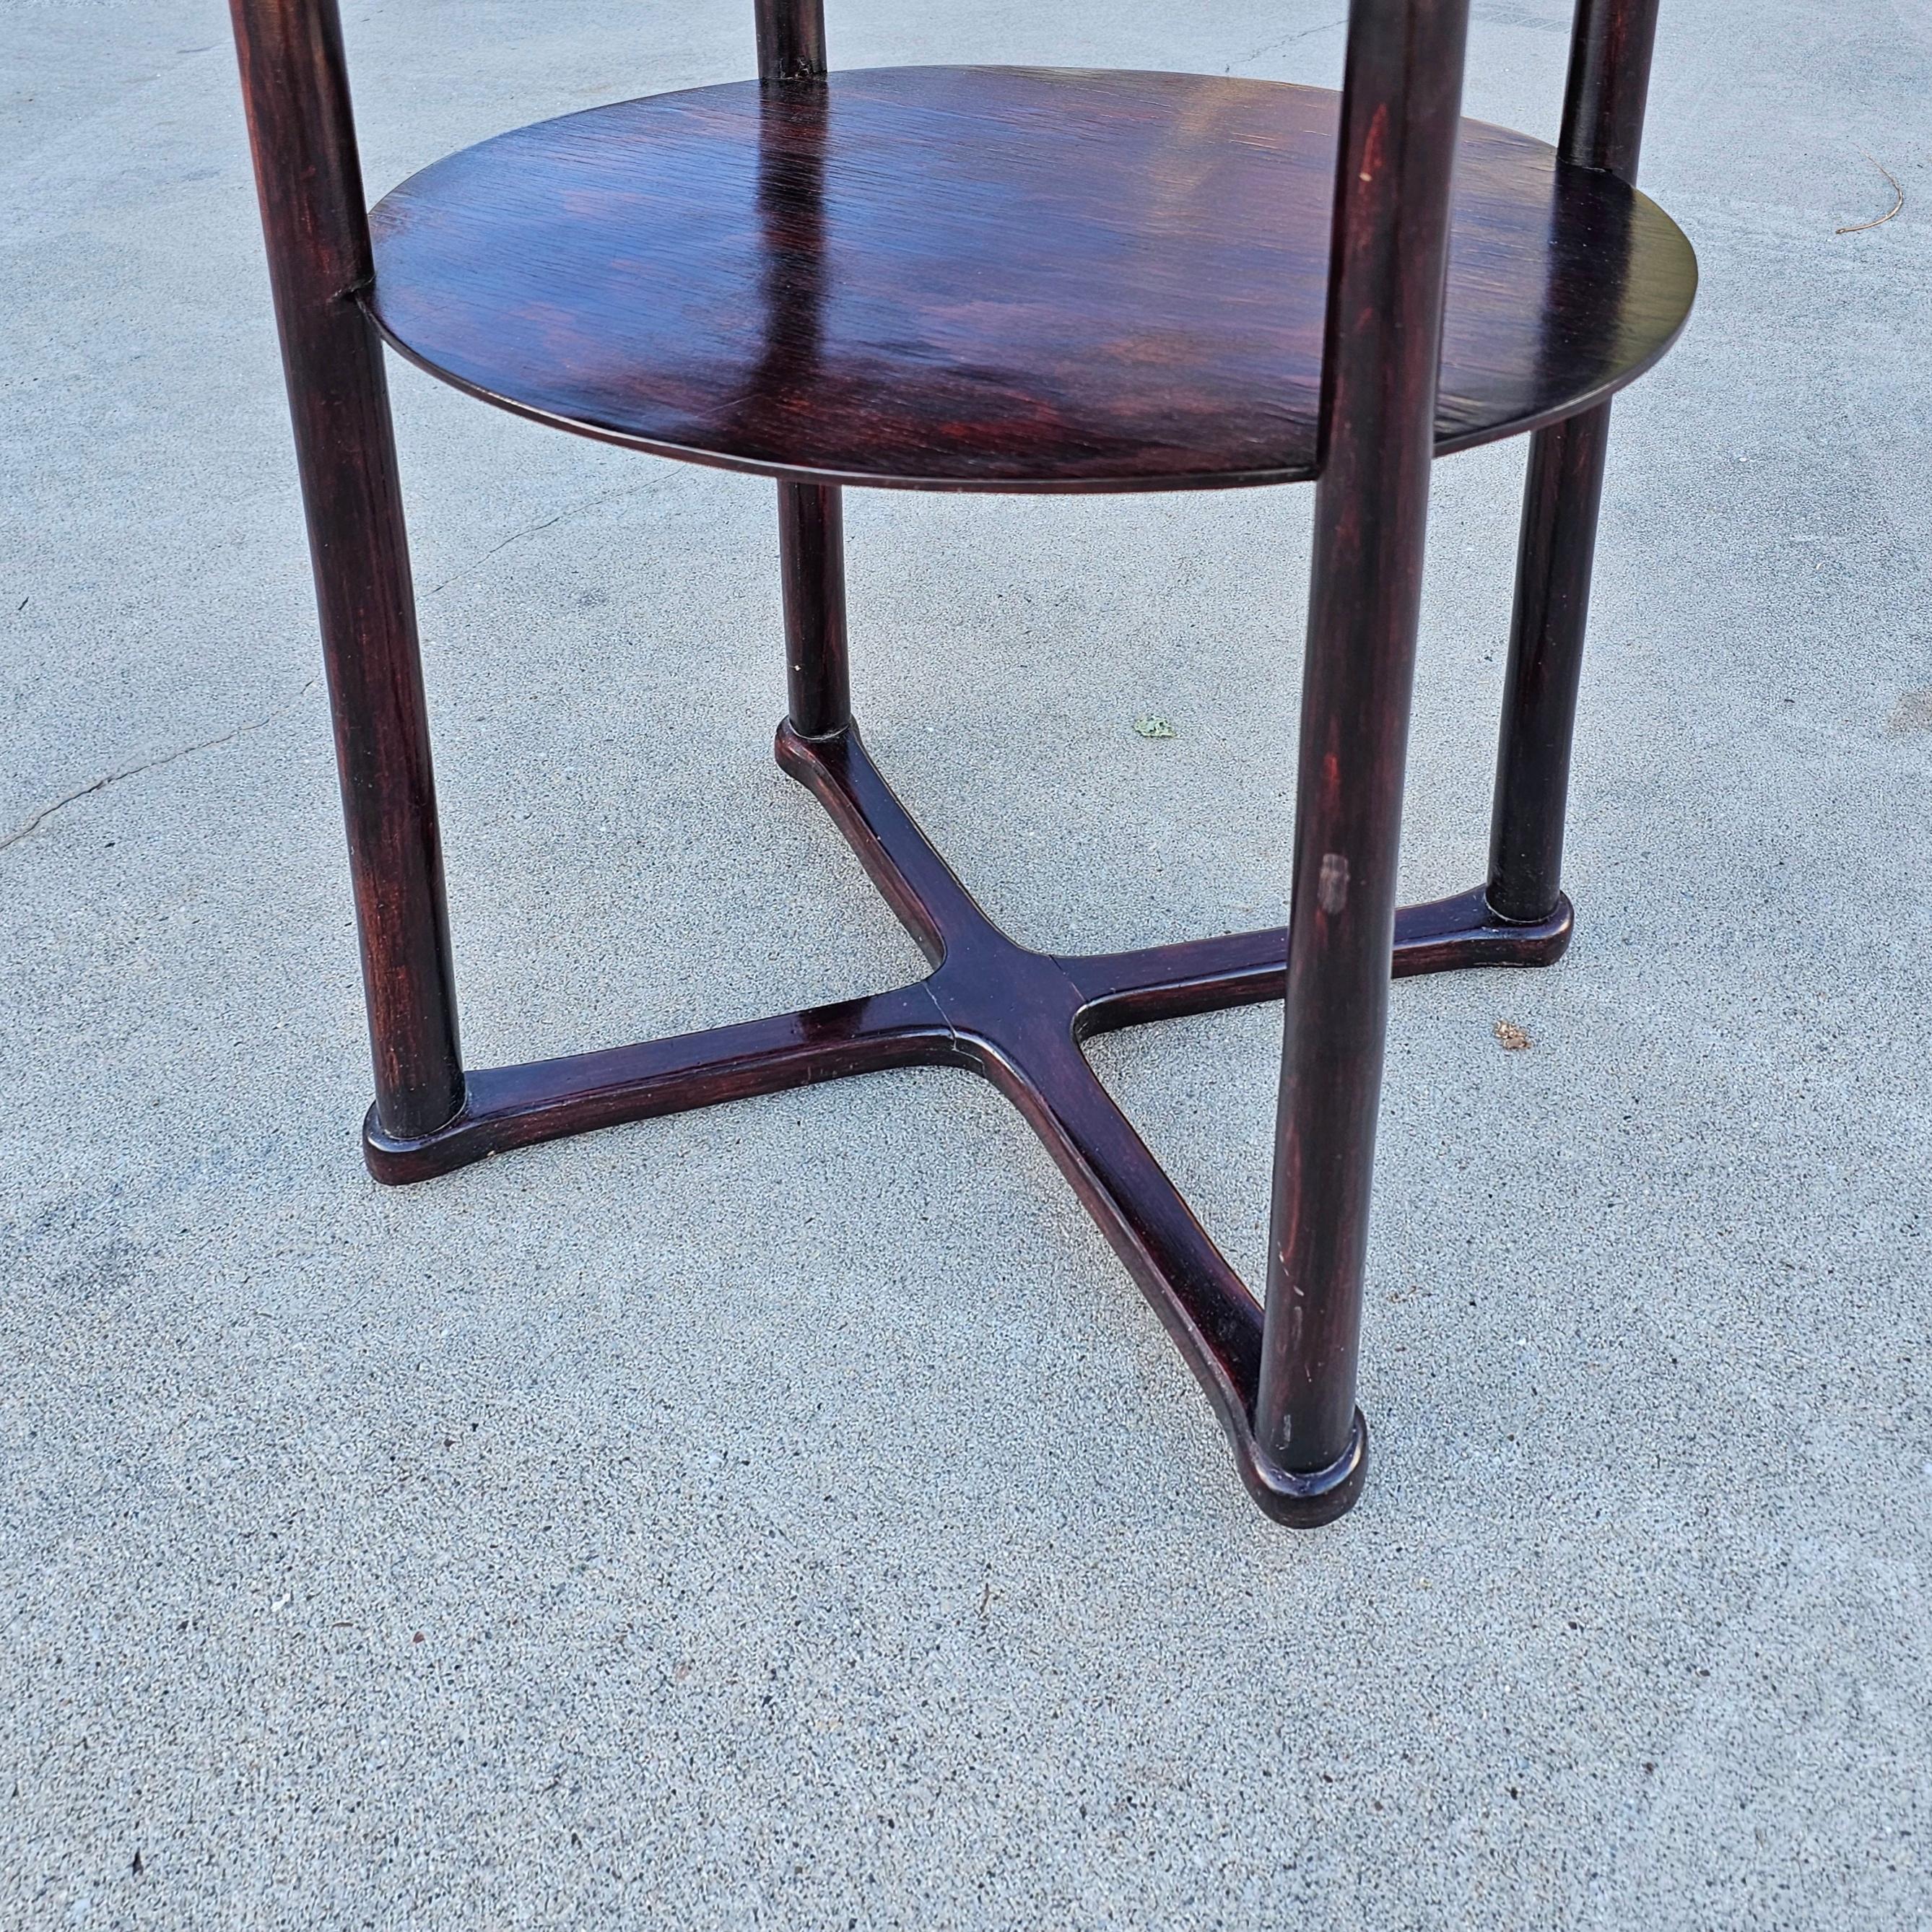 Vienna Secession Oval Side Table Model 960/2 designed by Josef Hoffmann, 1910s For Sale 1